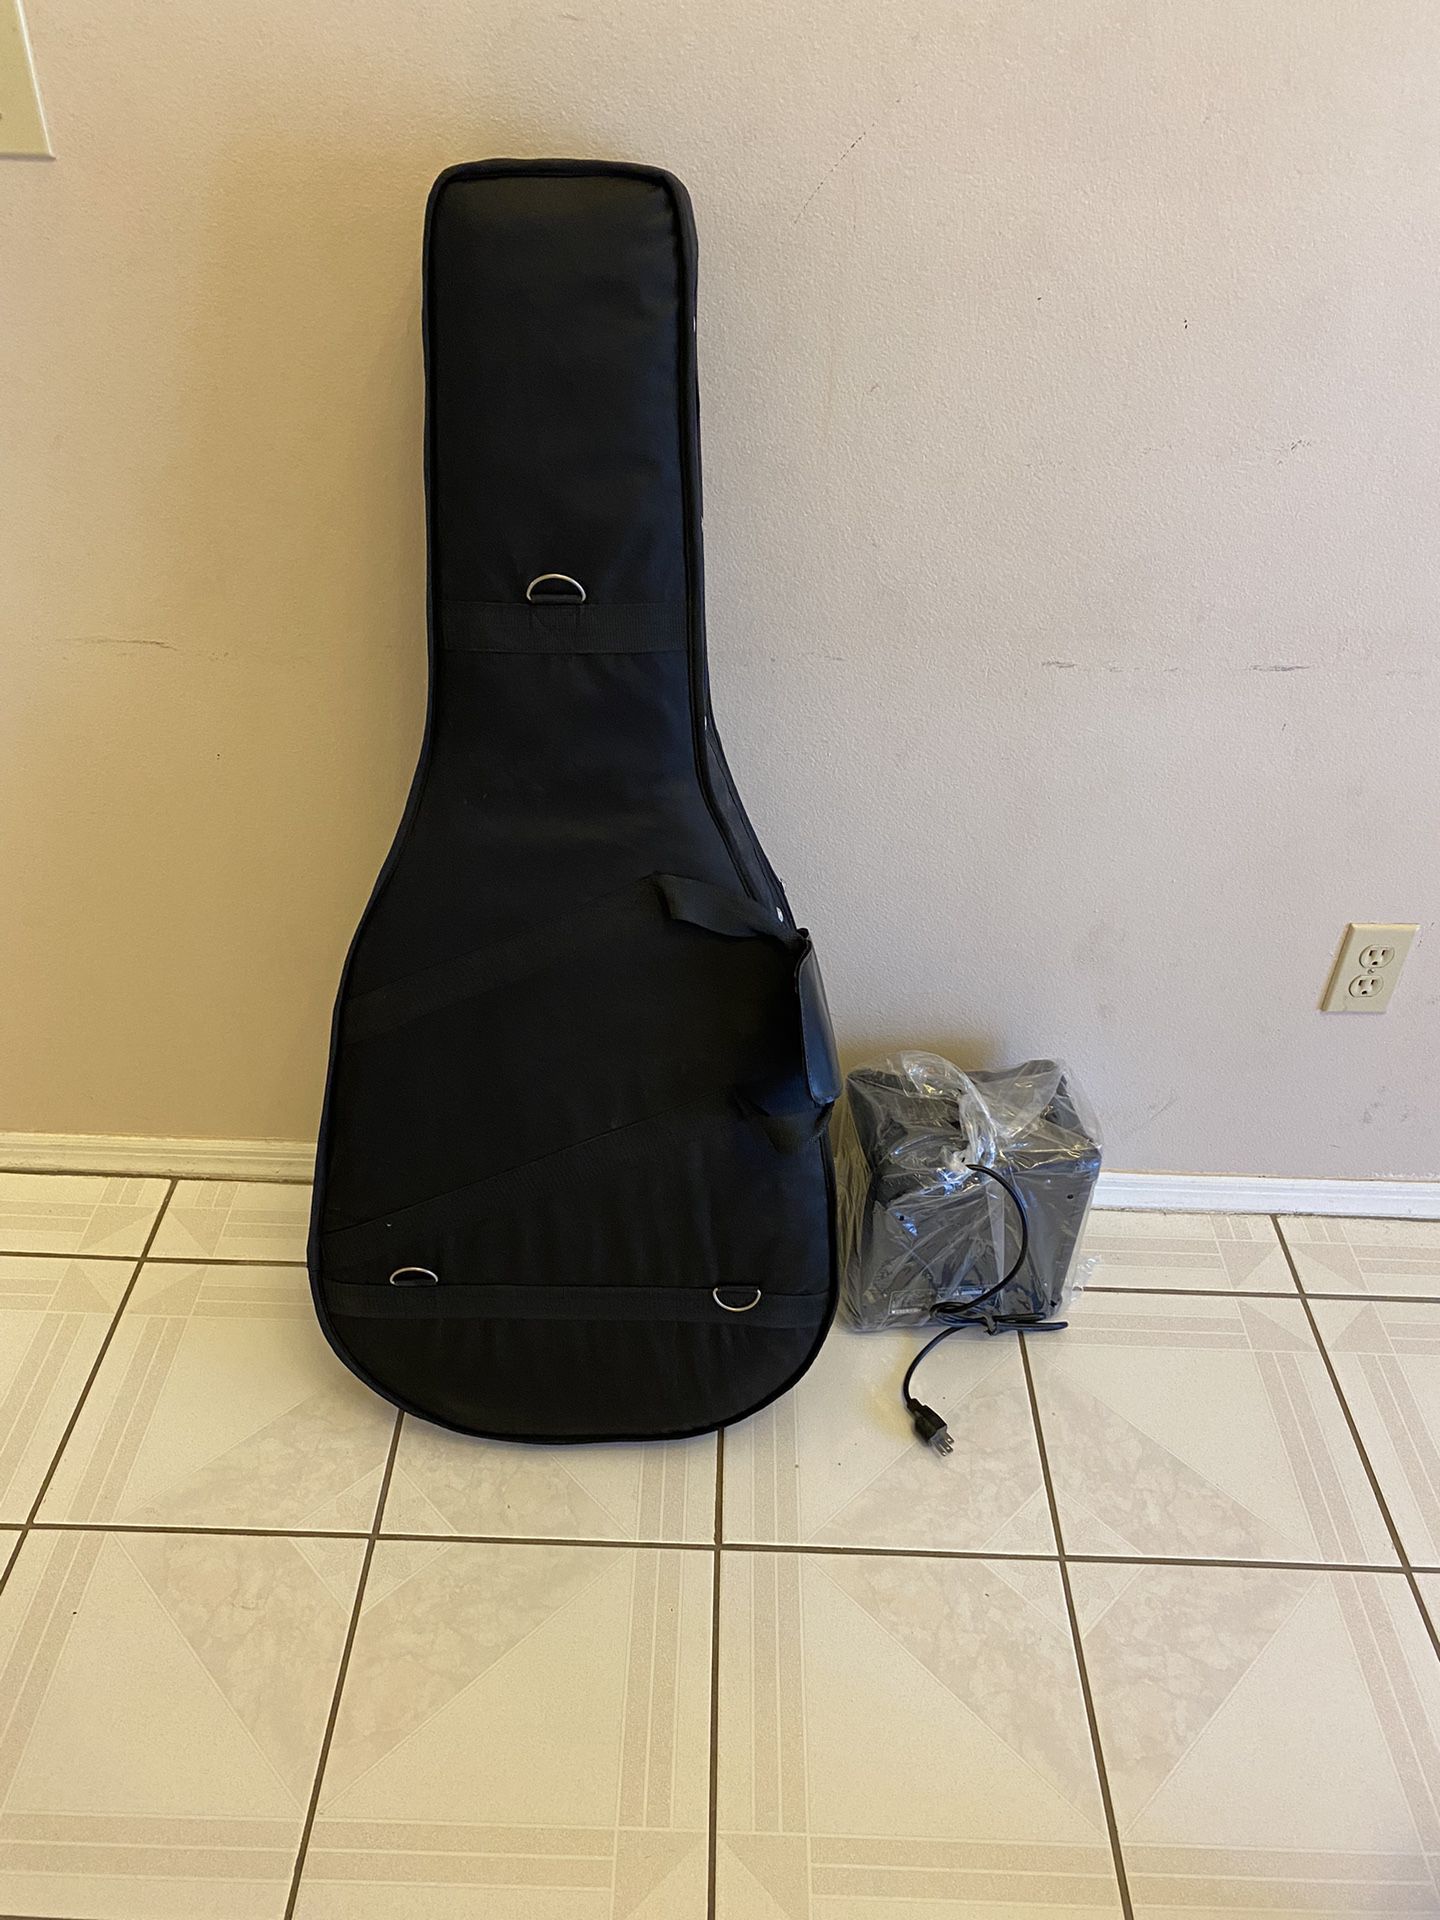 Brand new guitar with amp never used 